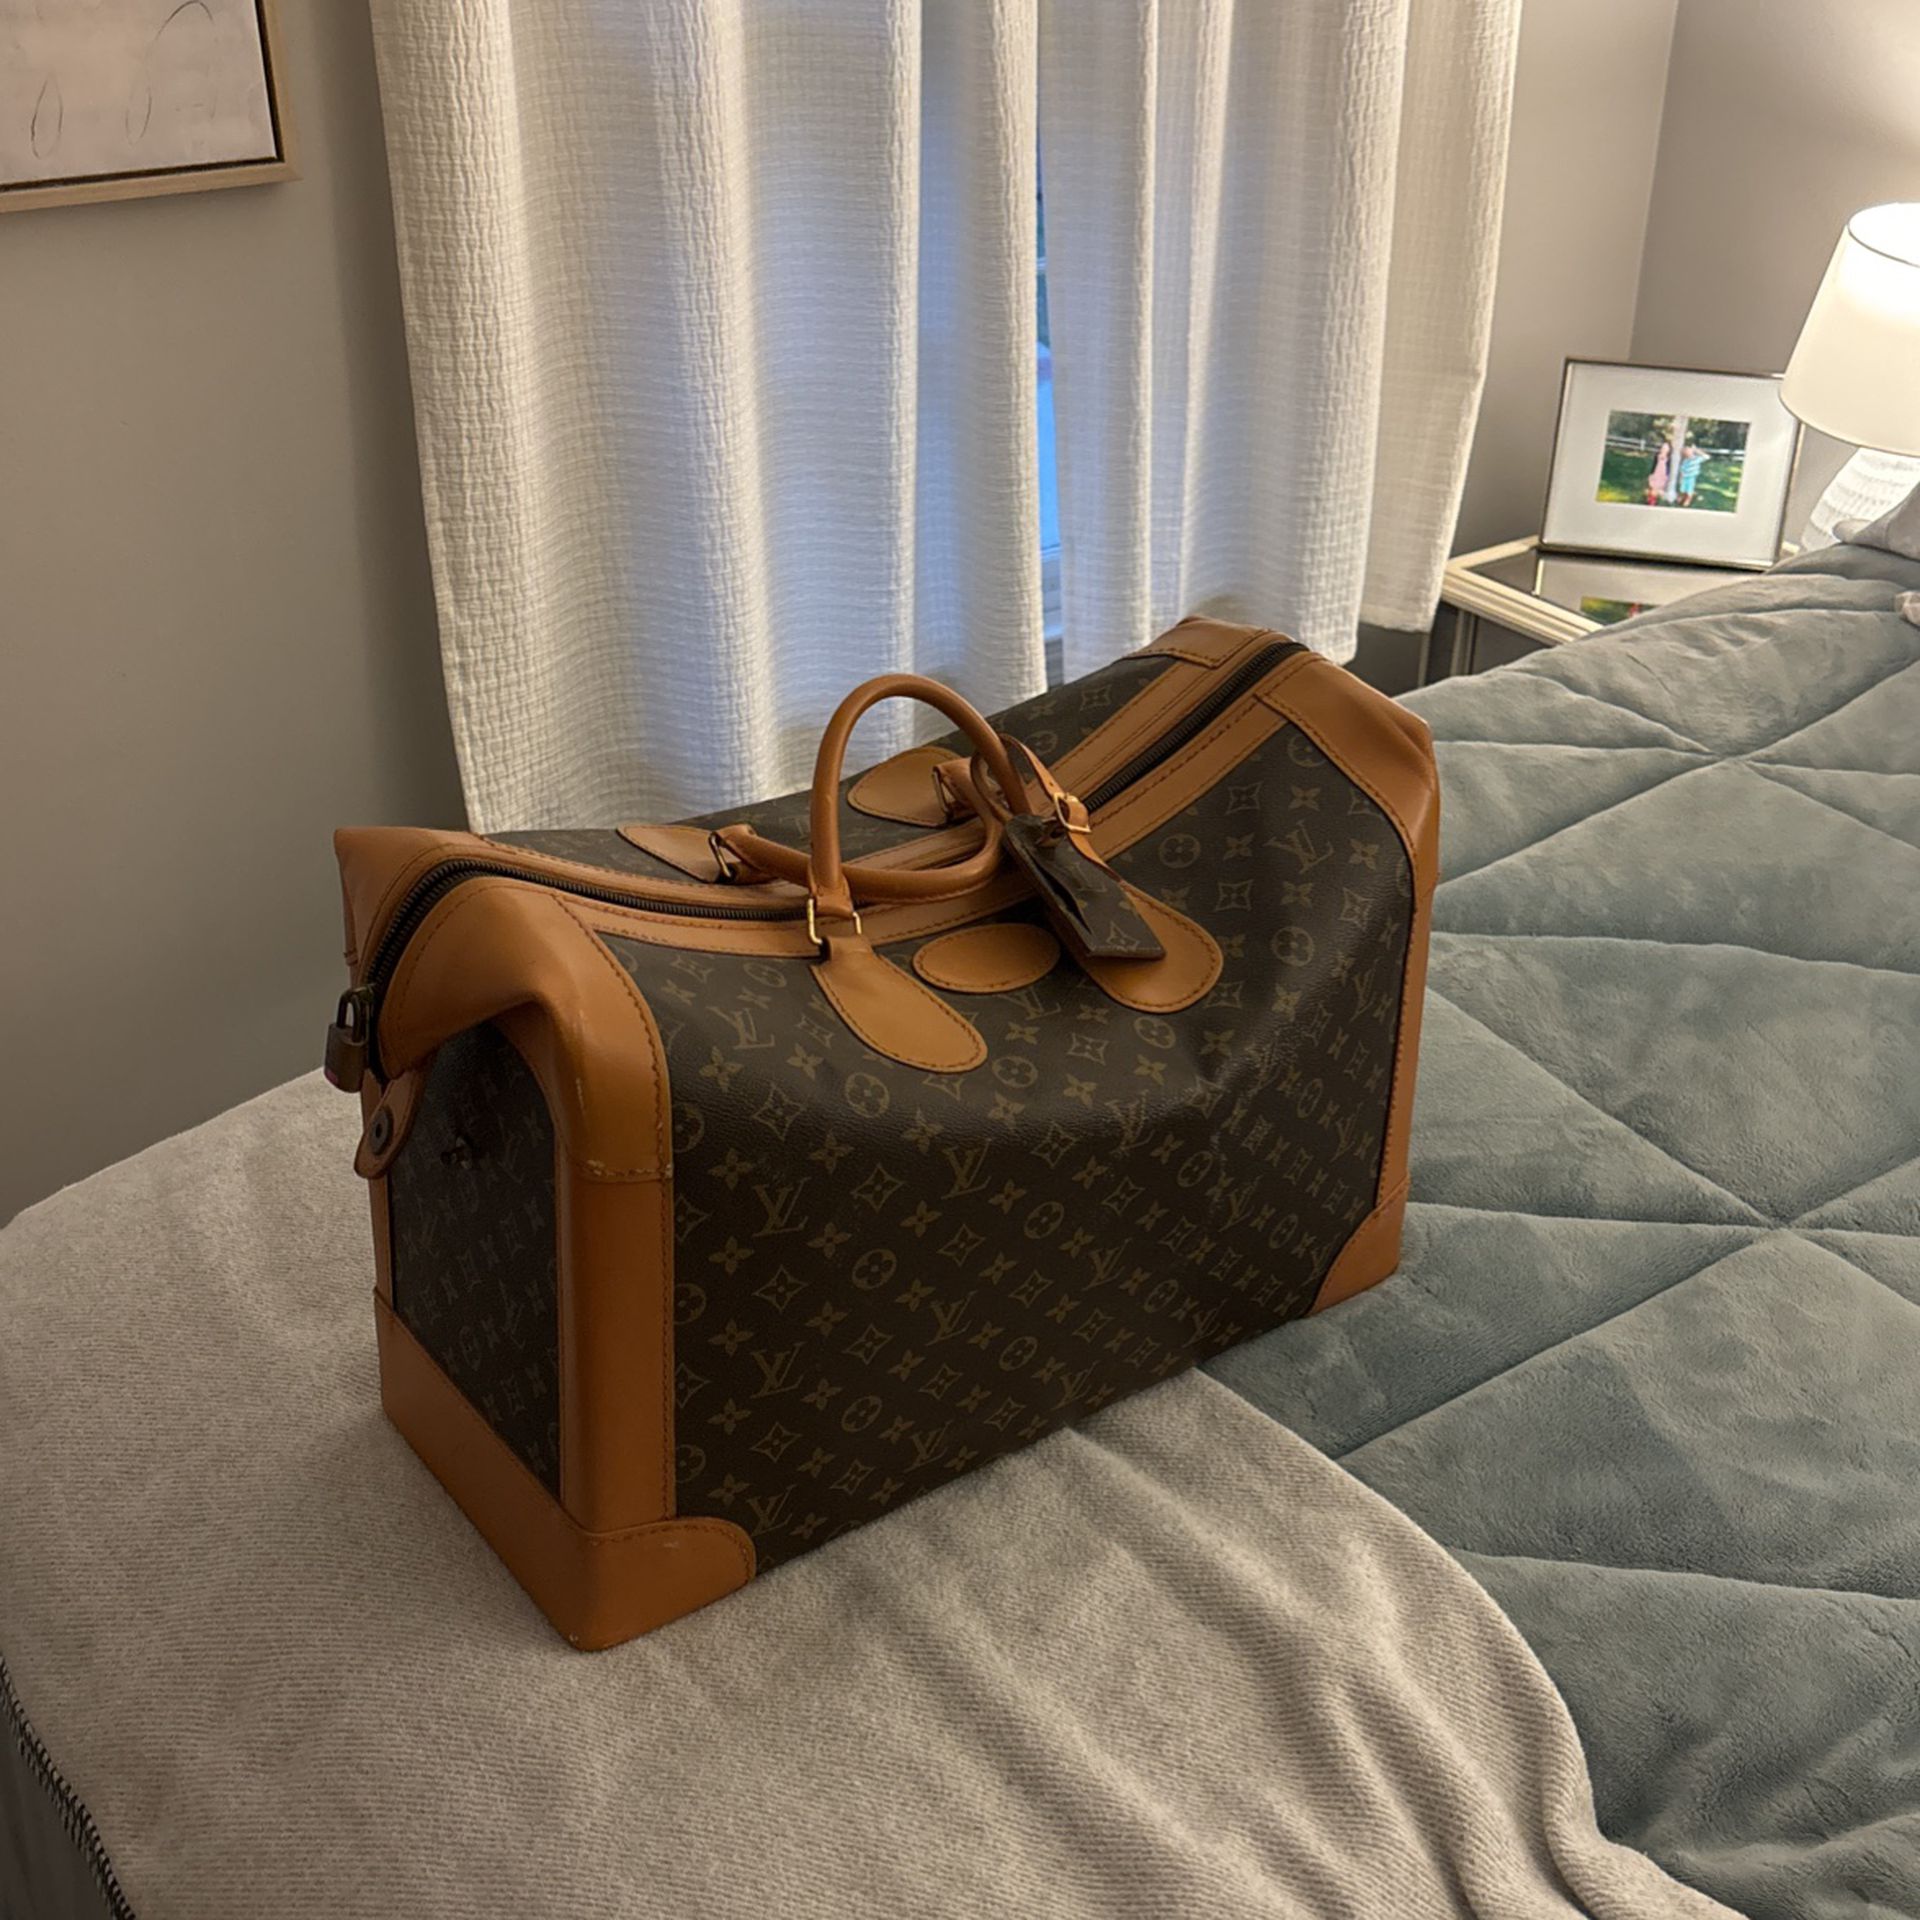 Authentic Louis Vuitton Bag(s) For Sale. Receipt Included As Well